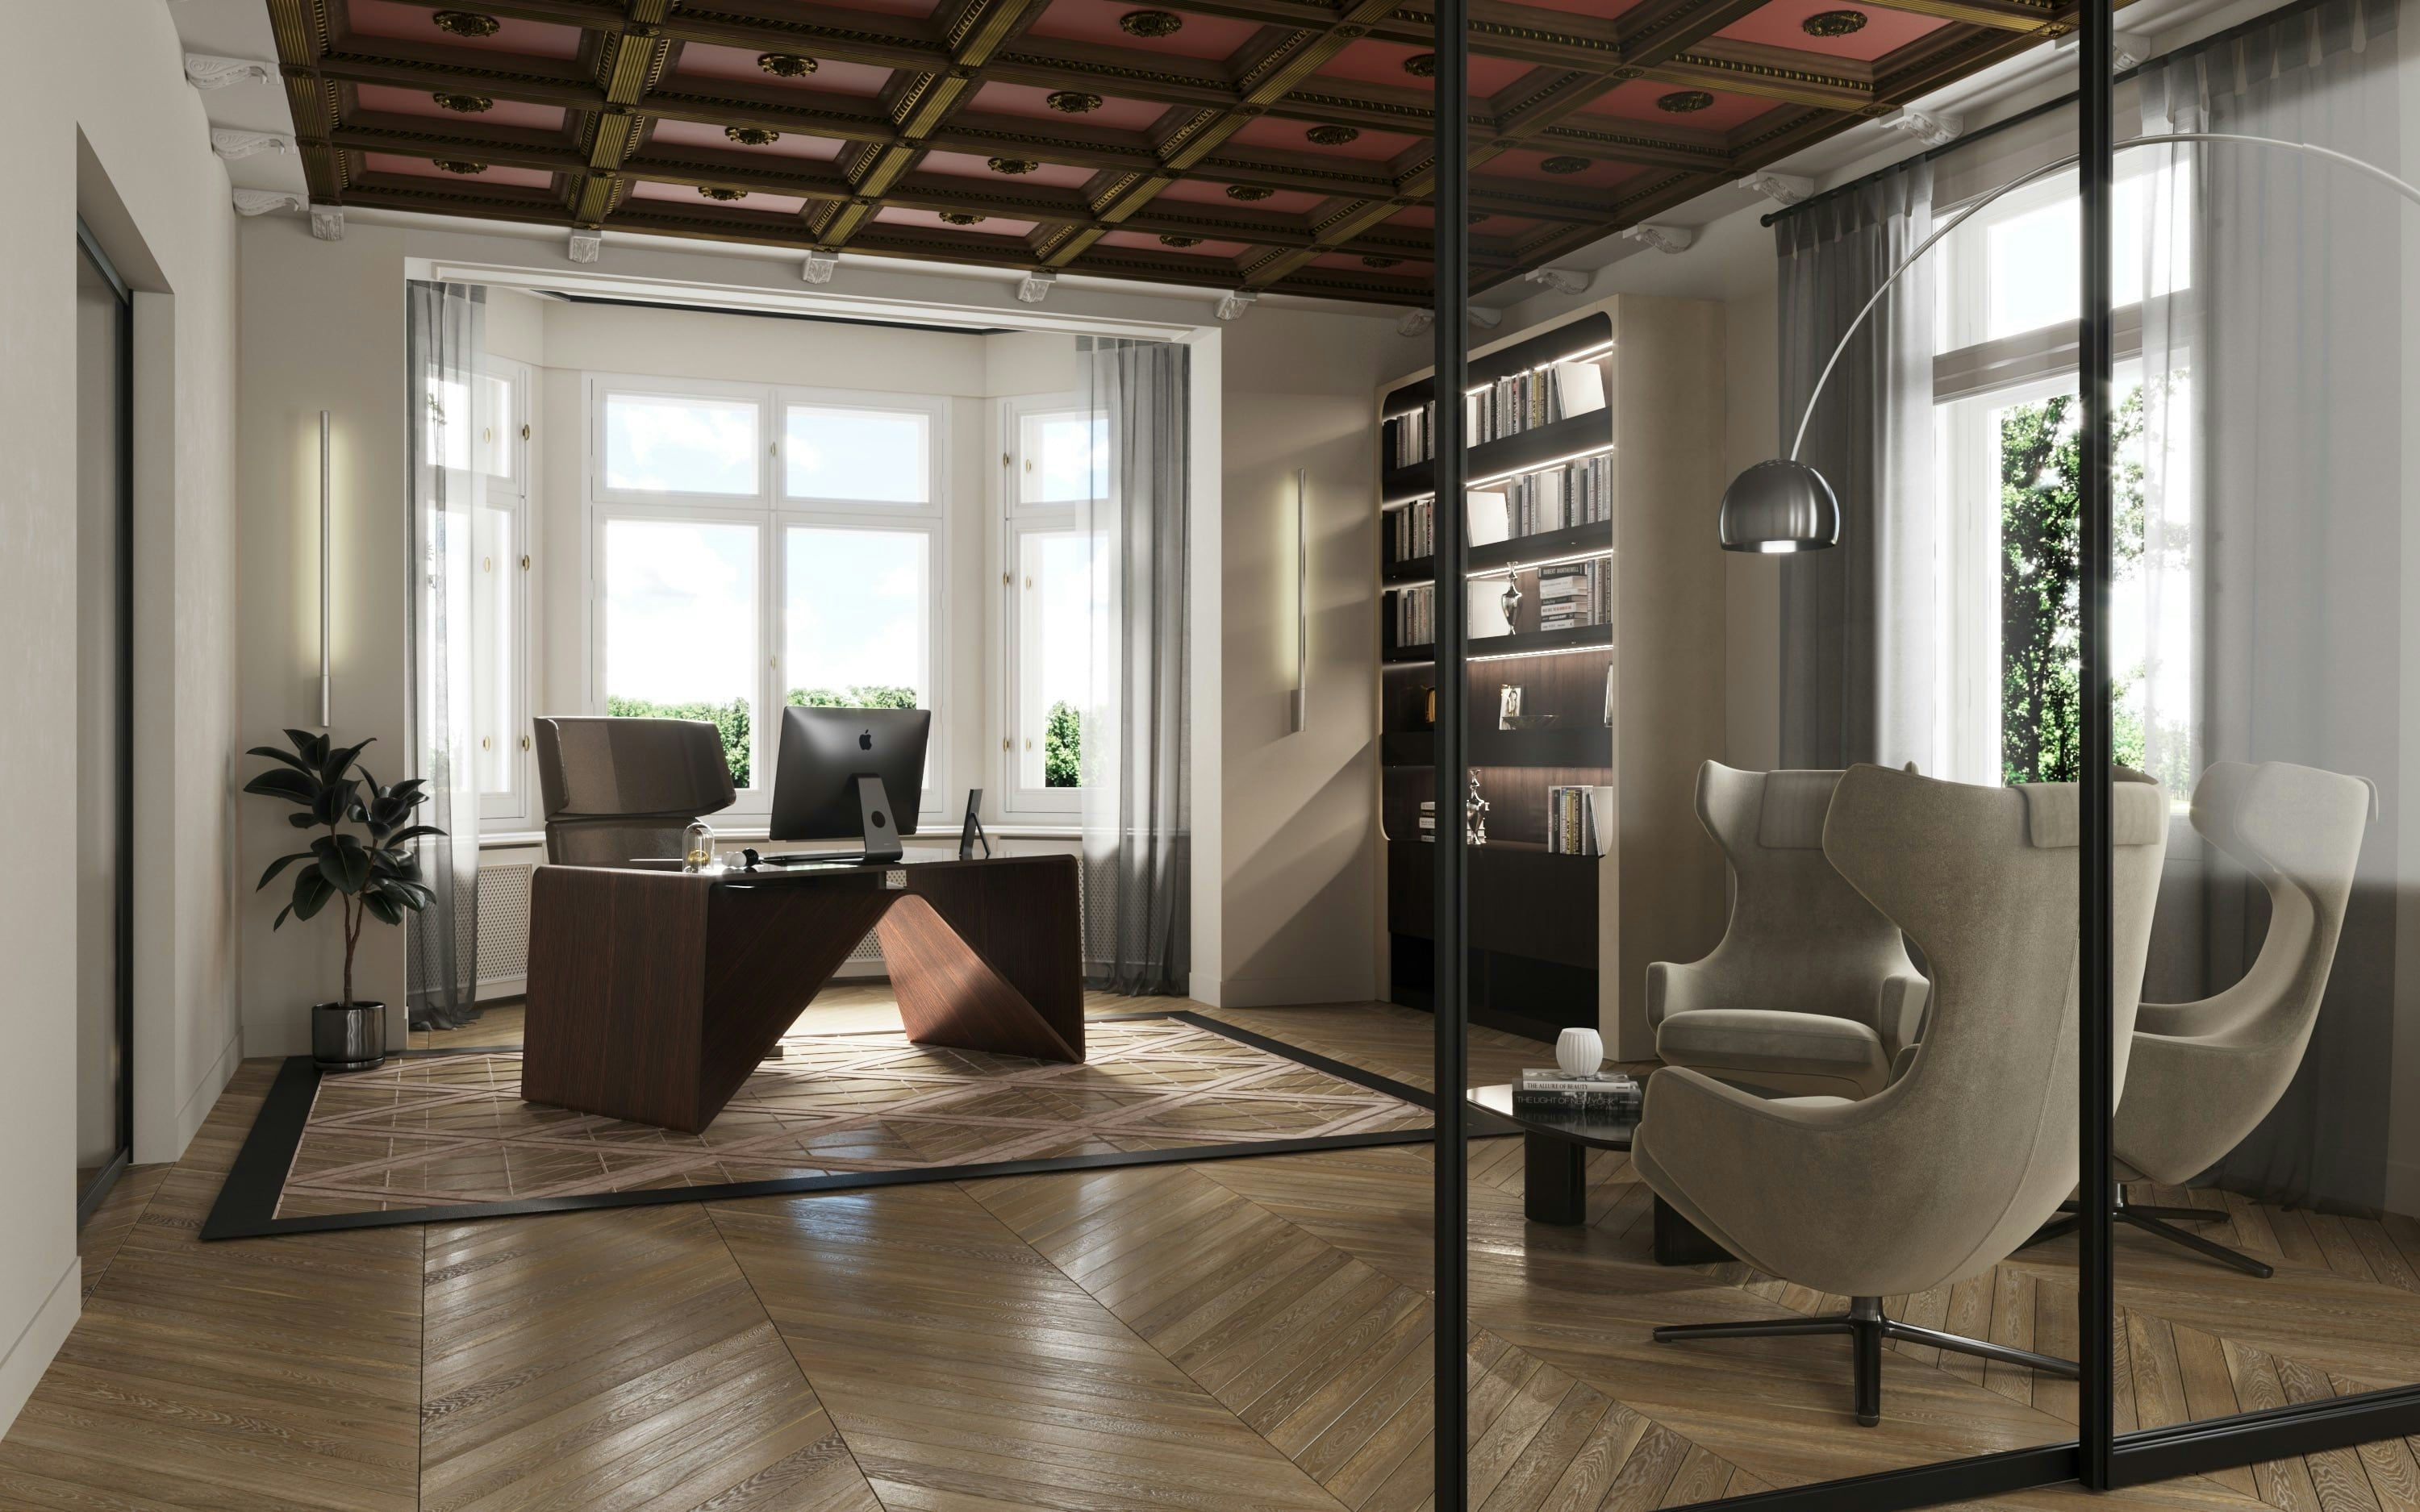 3D Visualization of working space in renovated old built villa in Berlin Wannsee, Germany